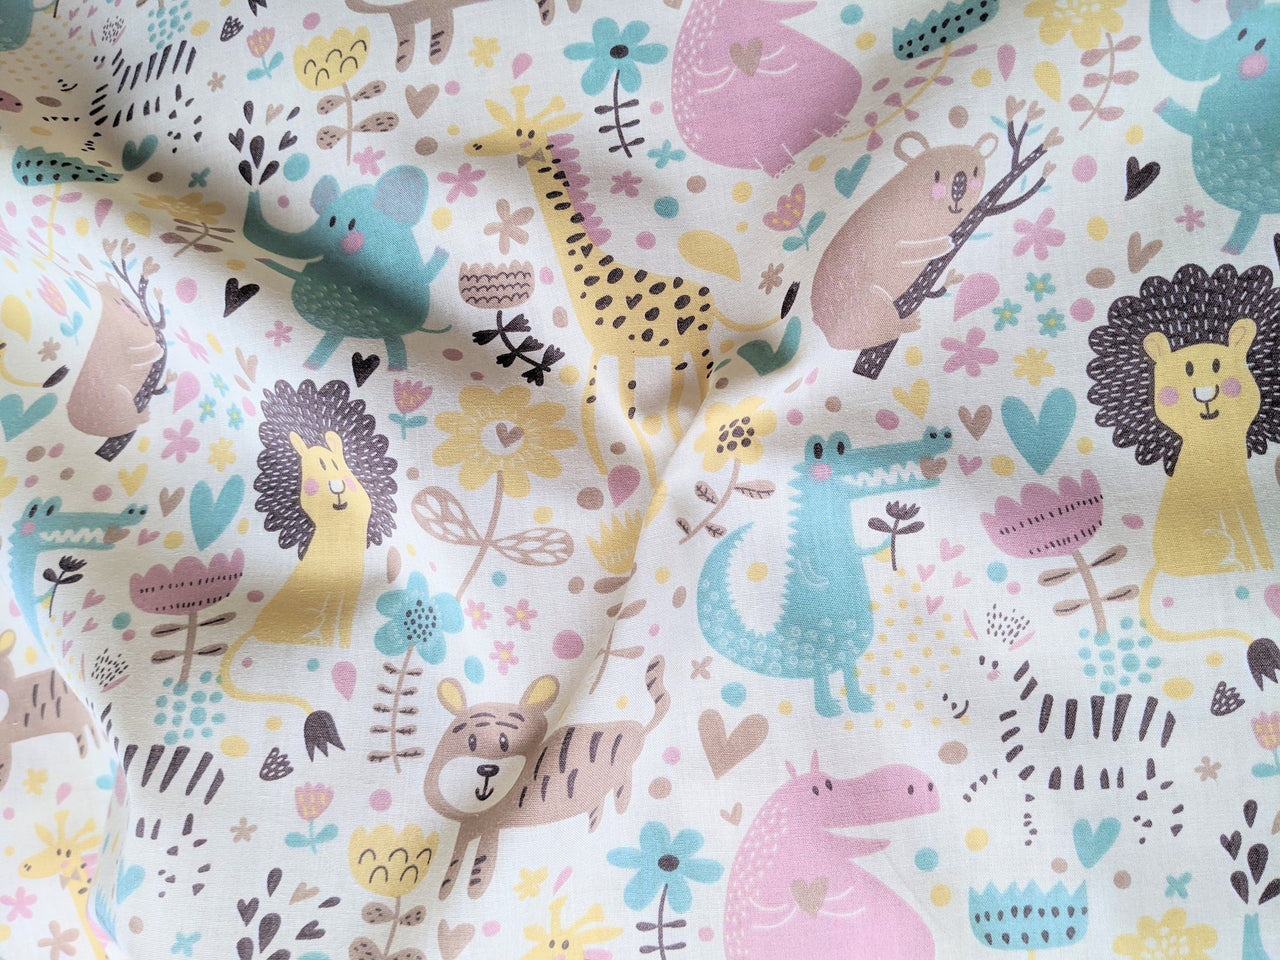 Jungle Animal Fabric, Polycotton Fabric, Love Animals Forest Fabric Sewing Fabric Nursery Fabric Quilting Craft Fabric by Half metre / metre